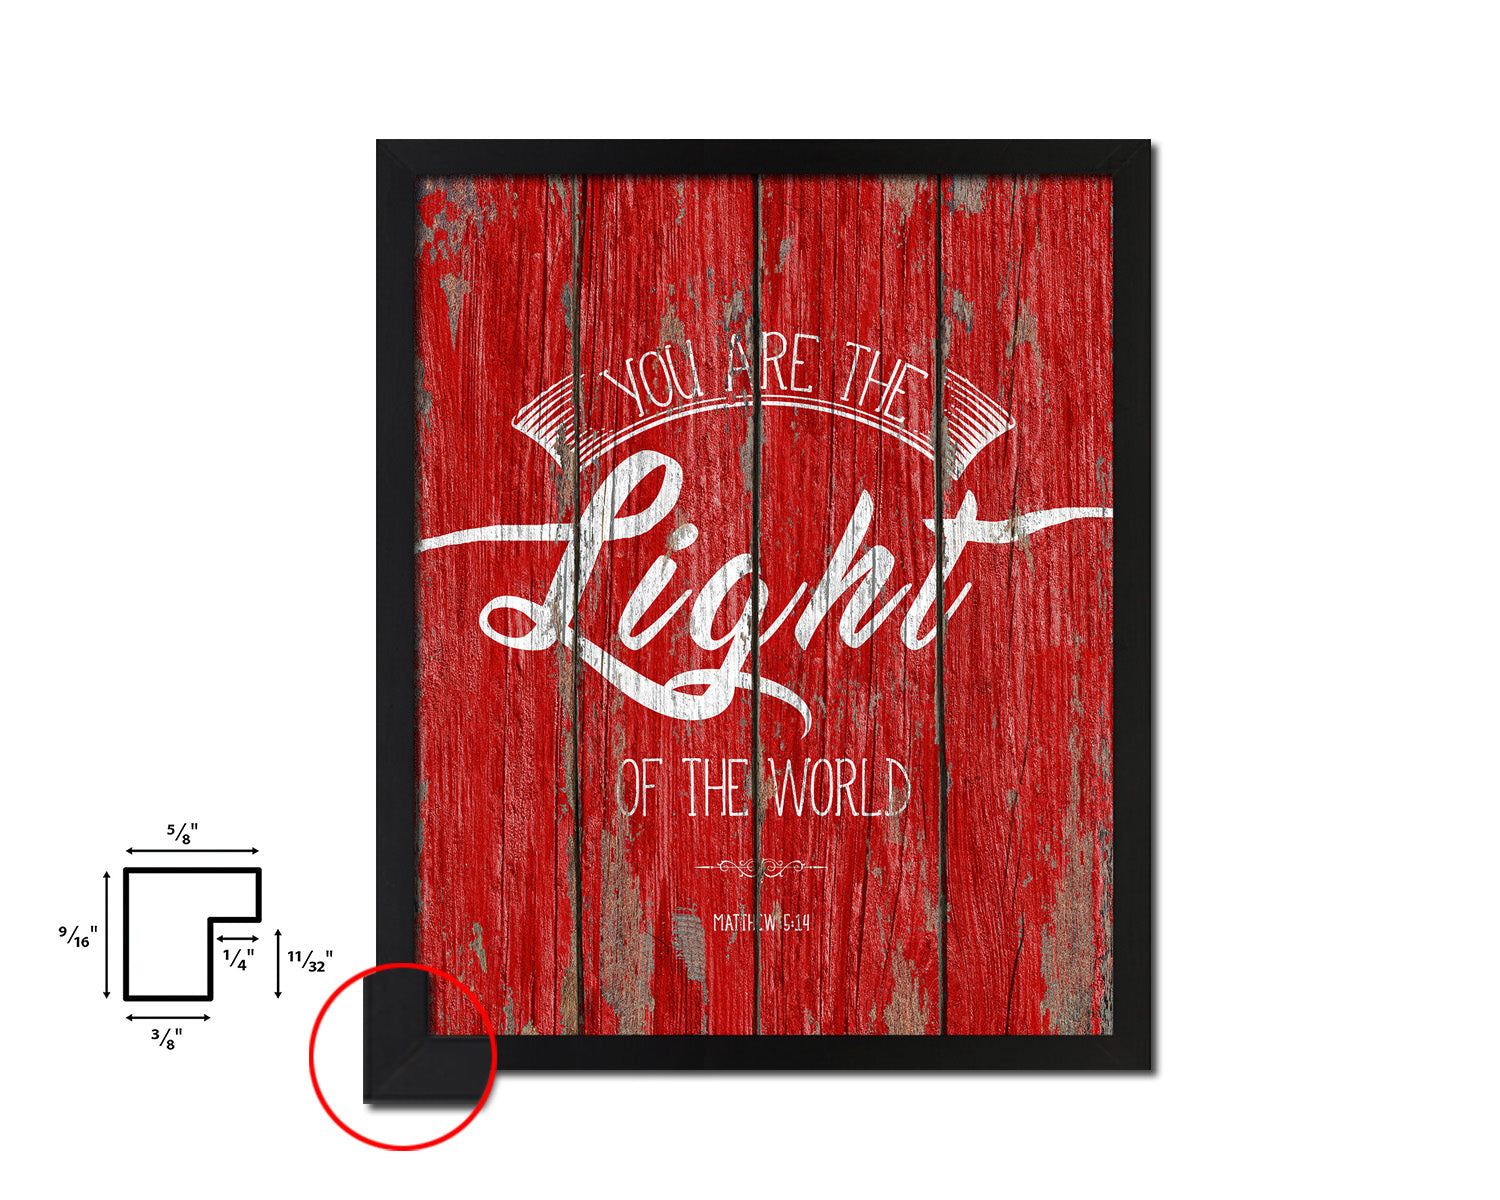 You are the Light of the world Matthew 5:14 Quote Framed Print Home Decor Wall Art Gifts